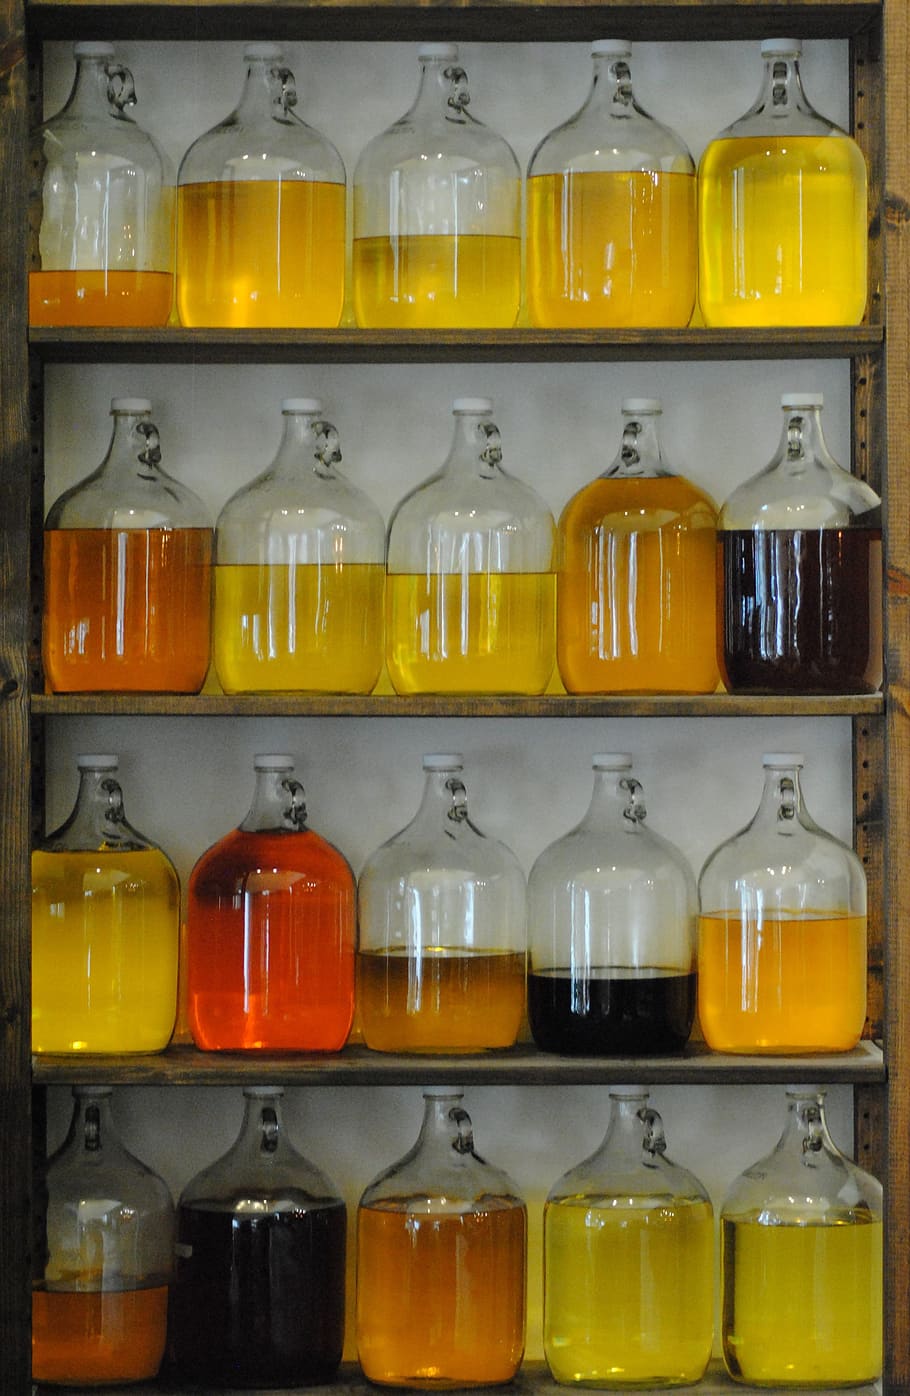 jars, jugs, glass, apothecary, vessel, container, oil, liquid, storage, shelves